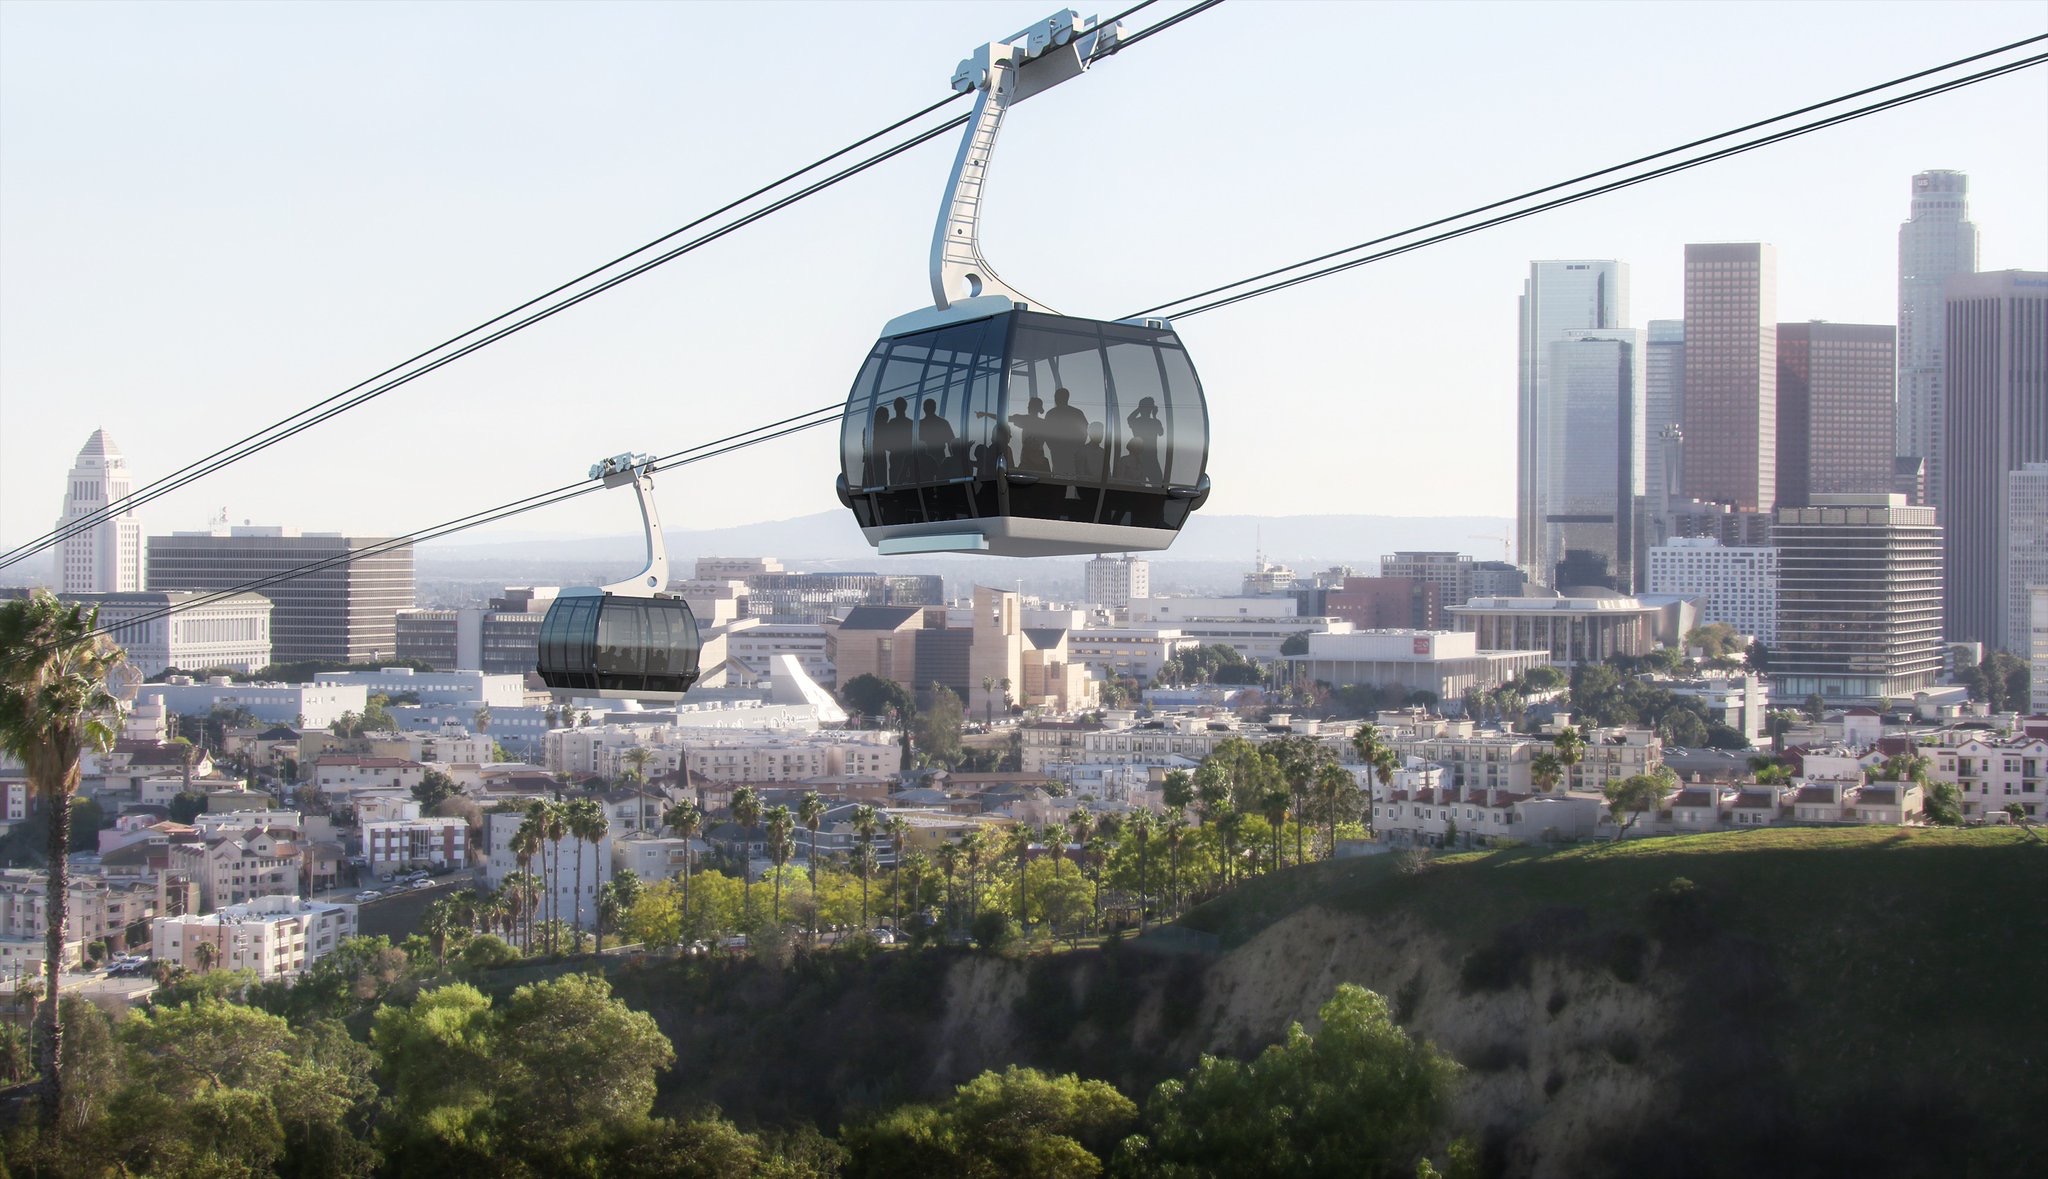 Gondolas could link Dodger Stadium to L.A.'s Union Station by 2022 ...